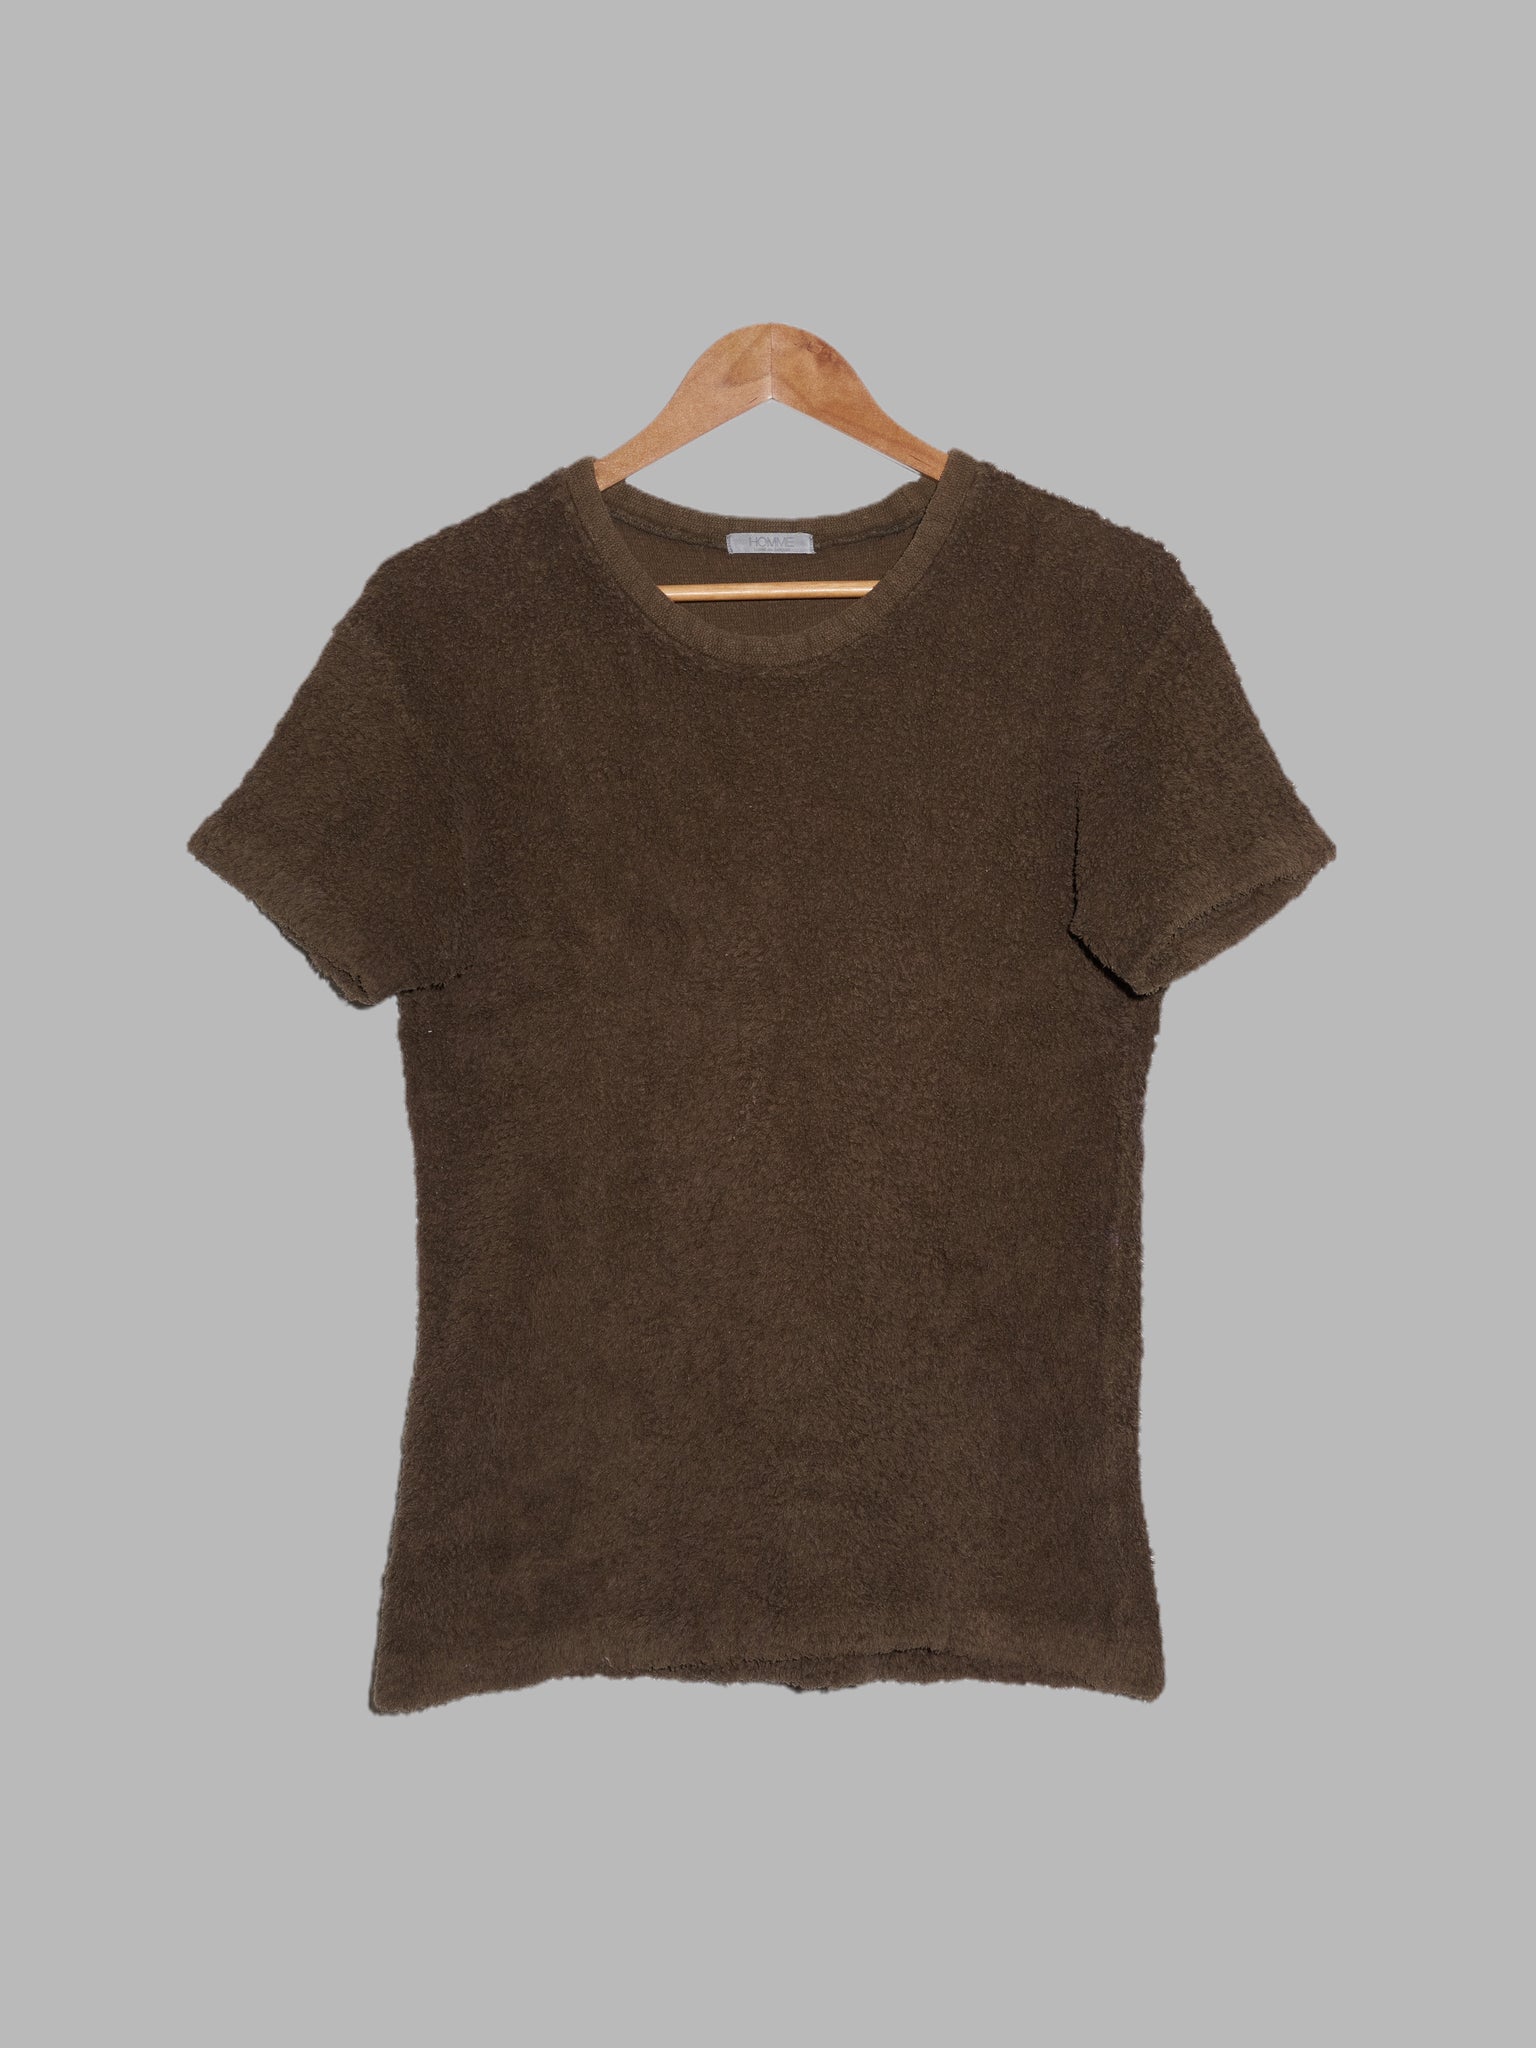 Homme Comme des Garcons mid 1980s brown towelling t-shirt - approx mens XS S